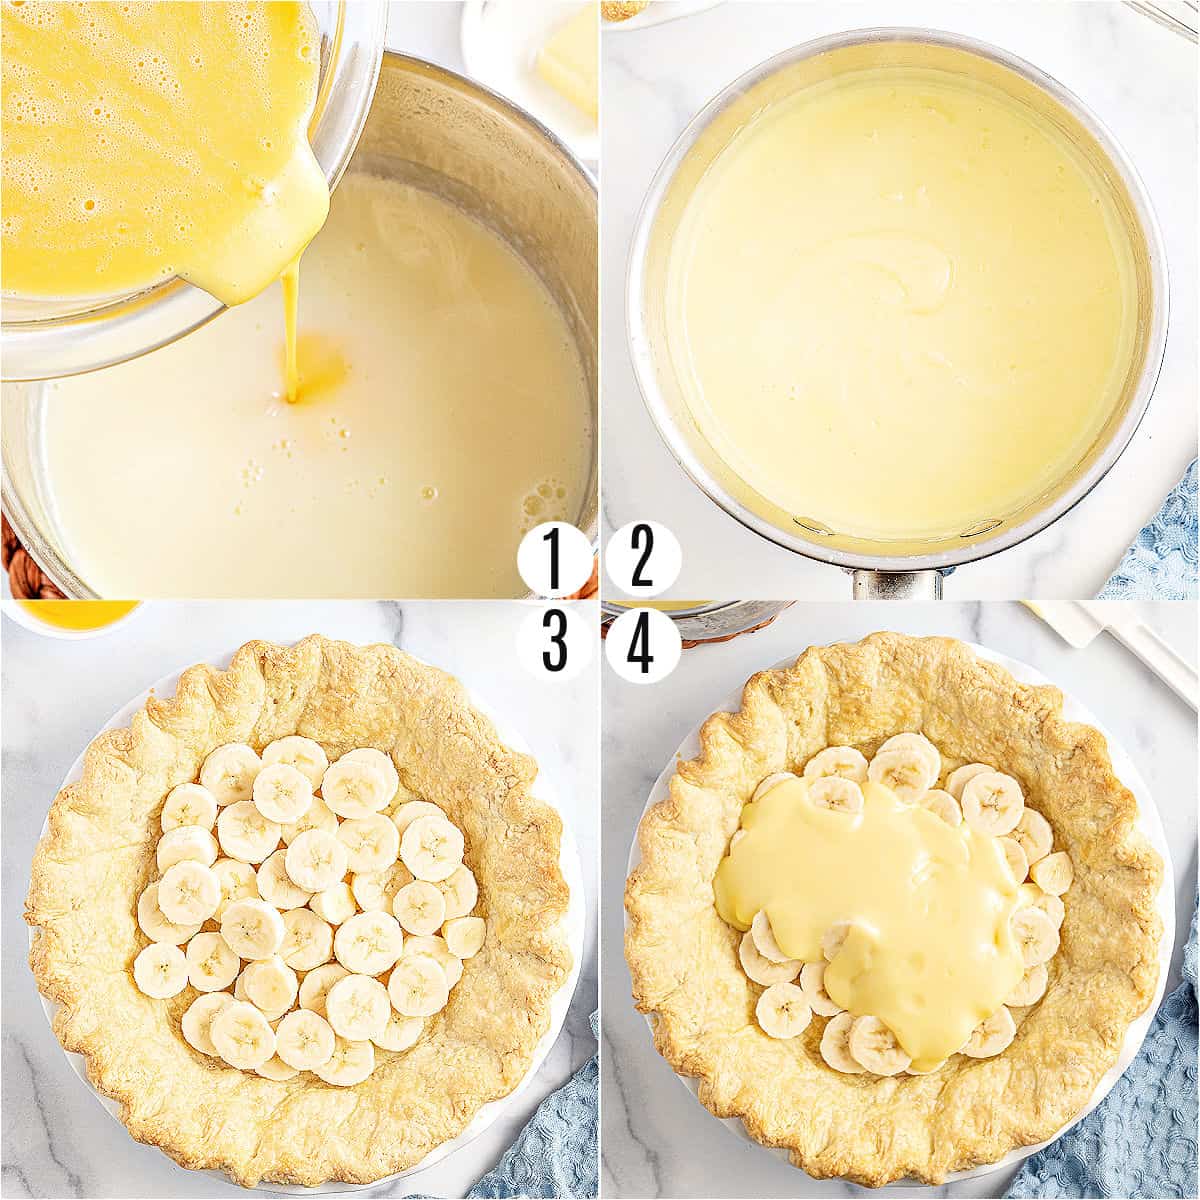 Step by step photos showing how to make banana cream pie.